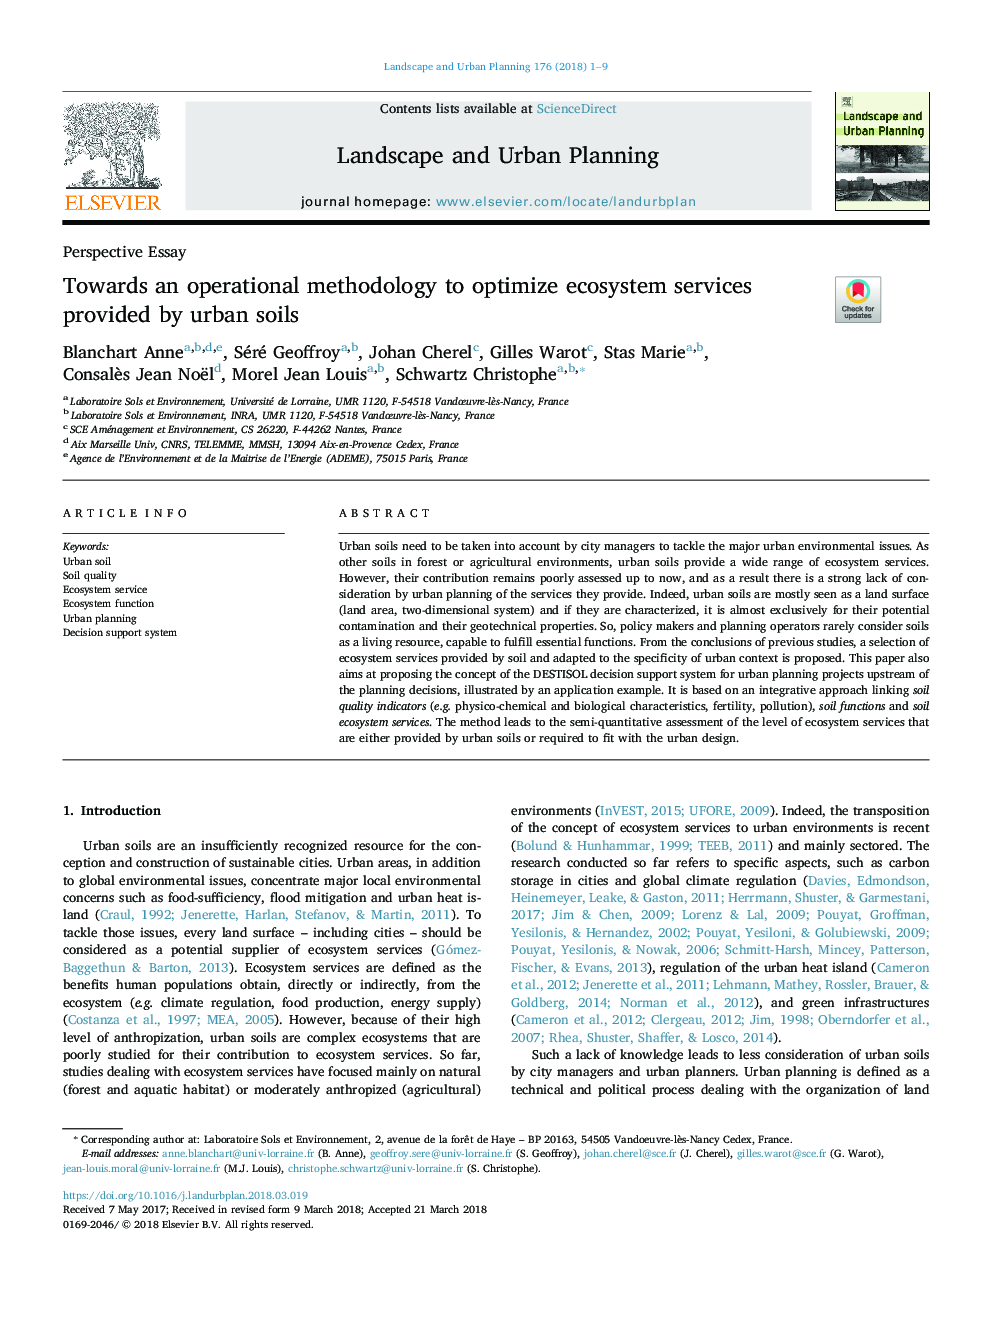 Towards an operational methodology to optimize ecosystem services provided by urban soils